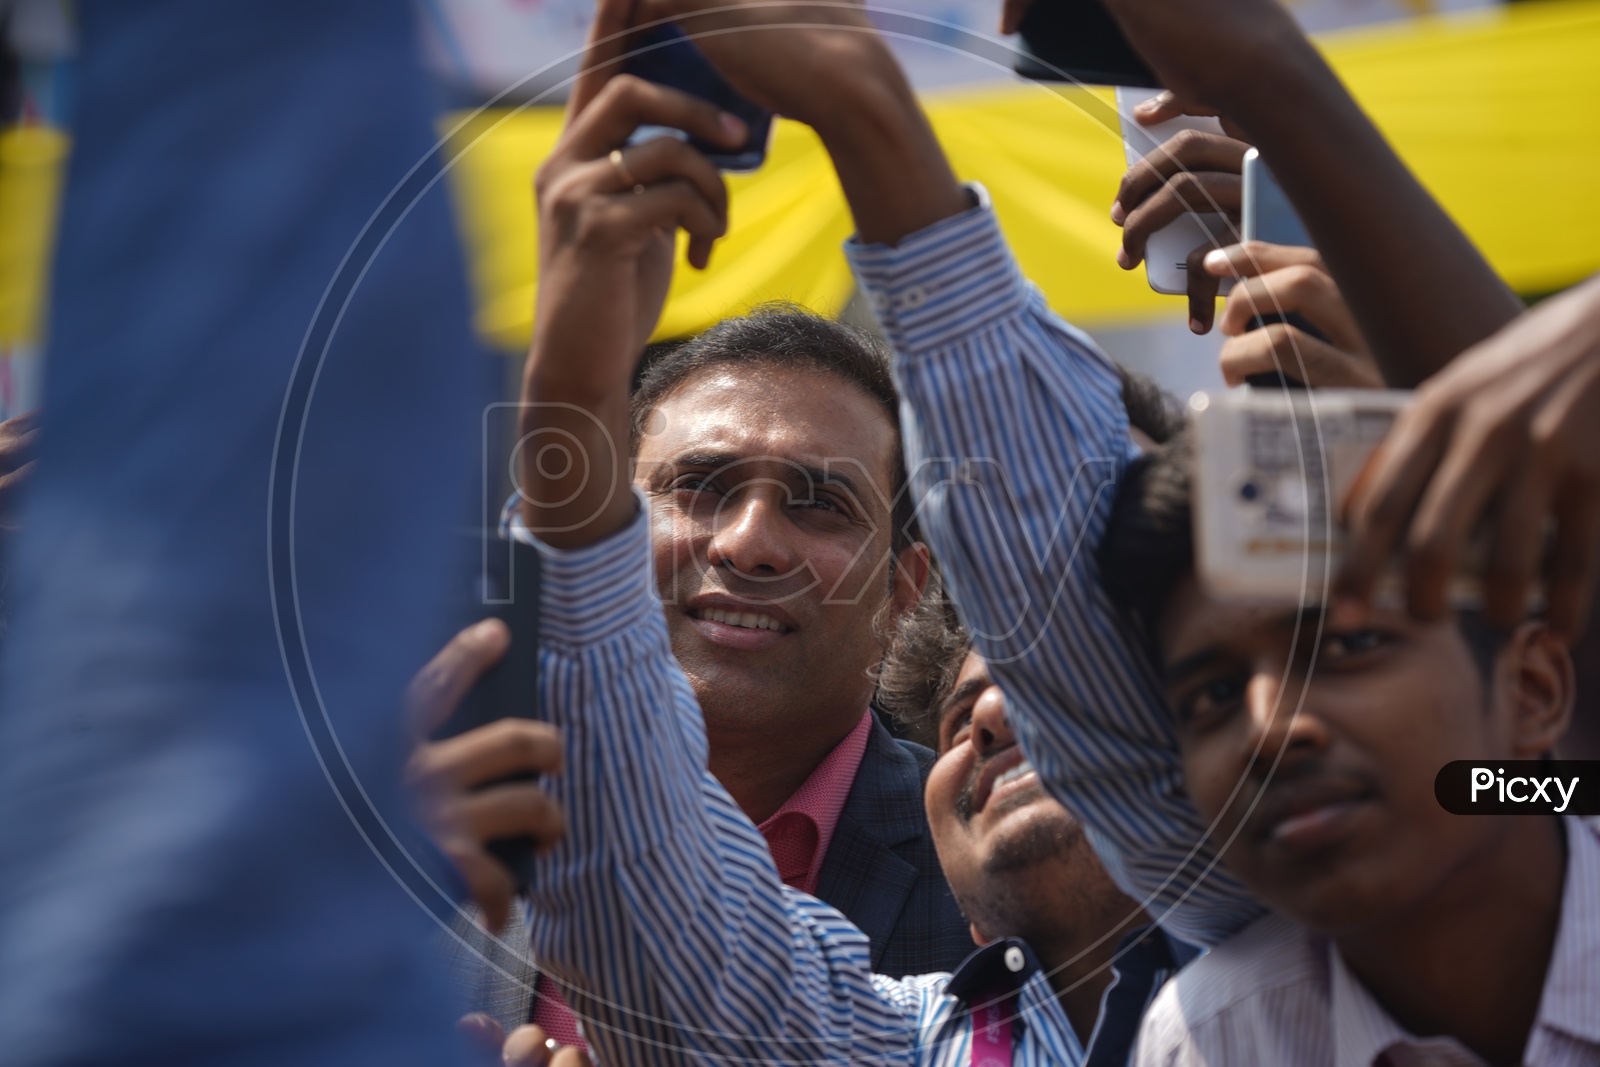 Students take selfies with former Indian cricketer V V S Laxman while he arrives to address the Social Media Summit in Amaravati 2018